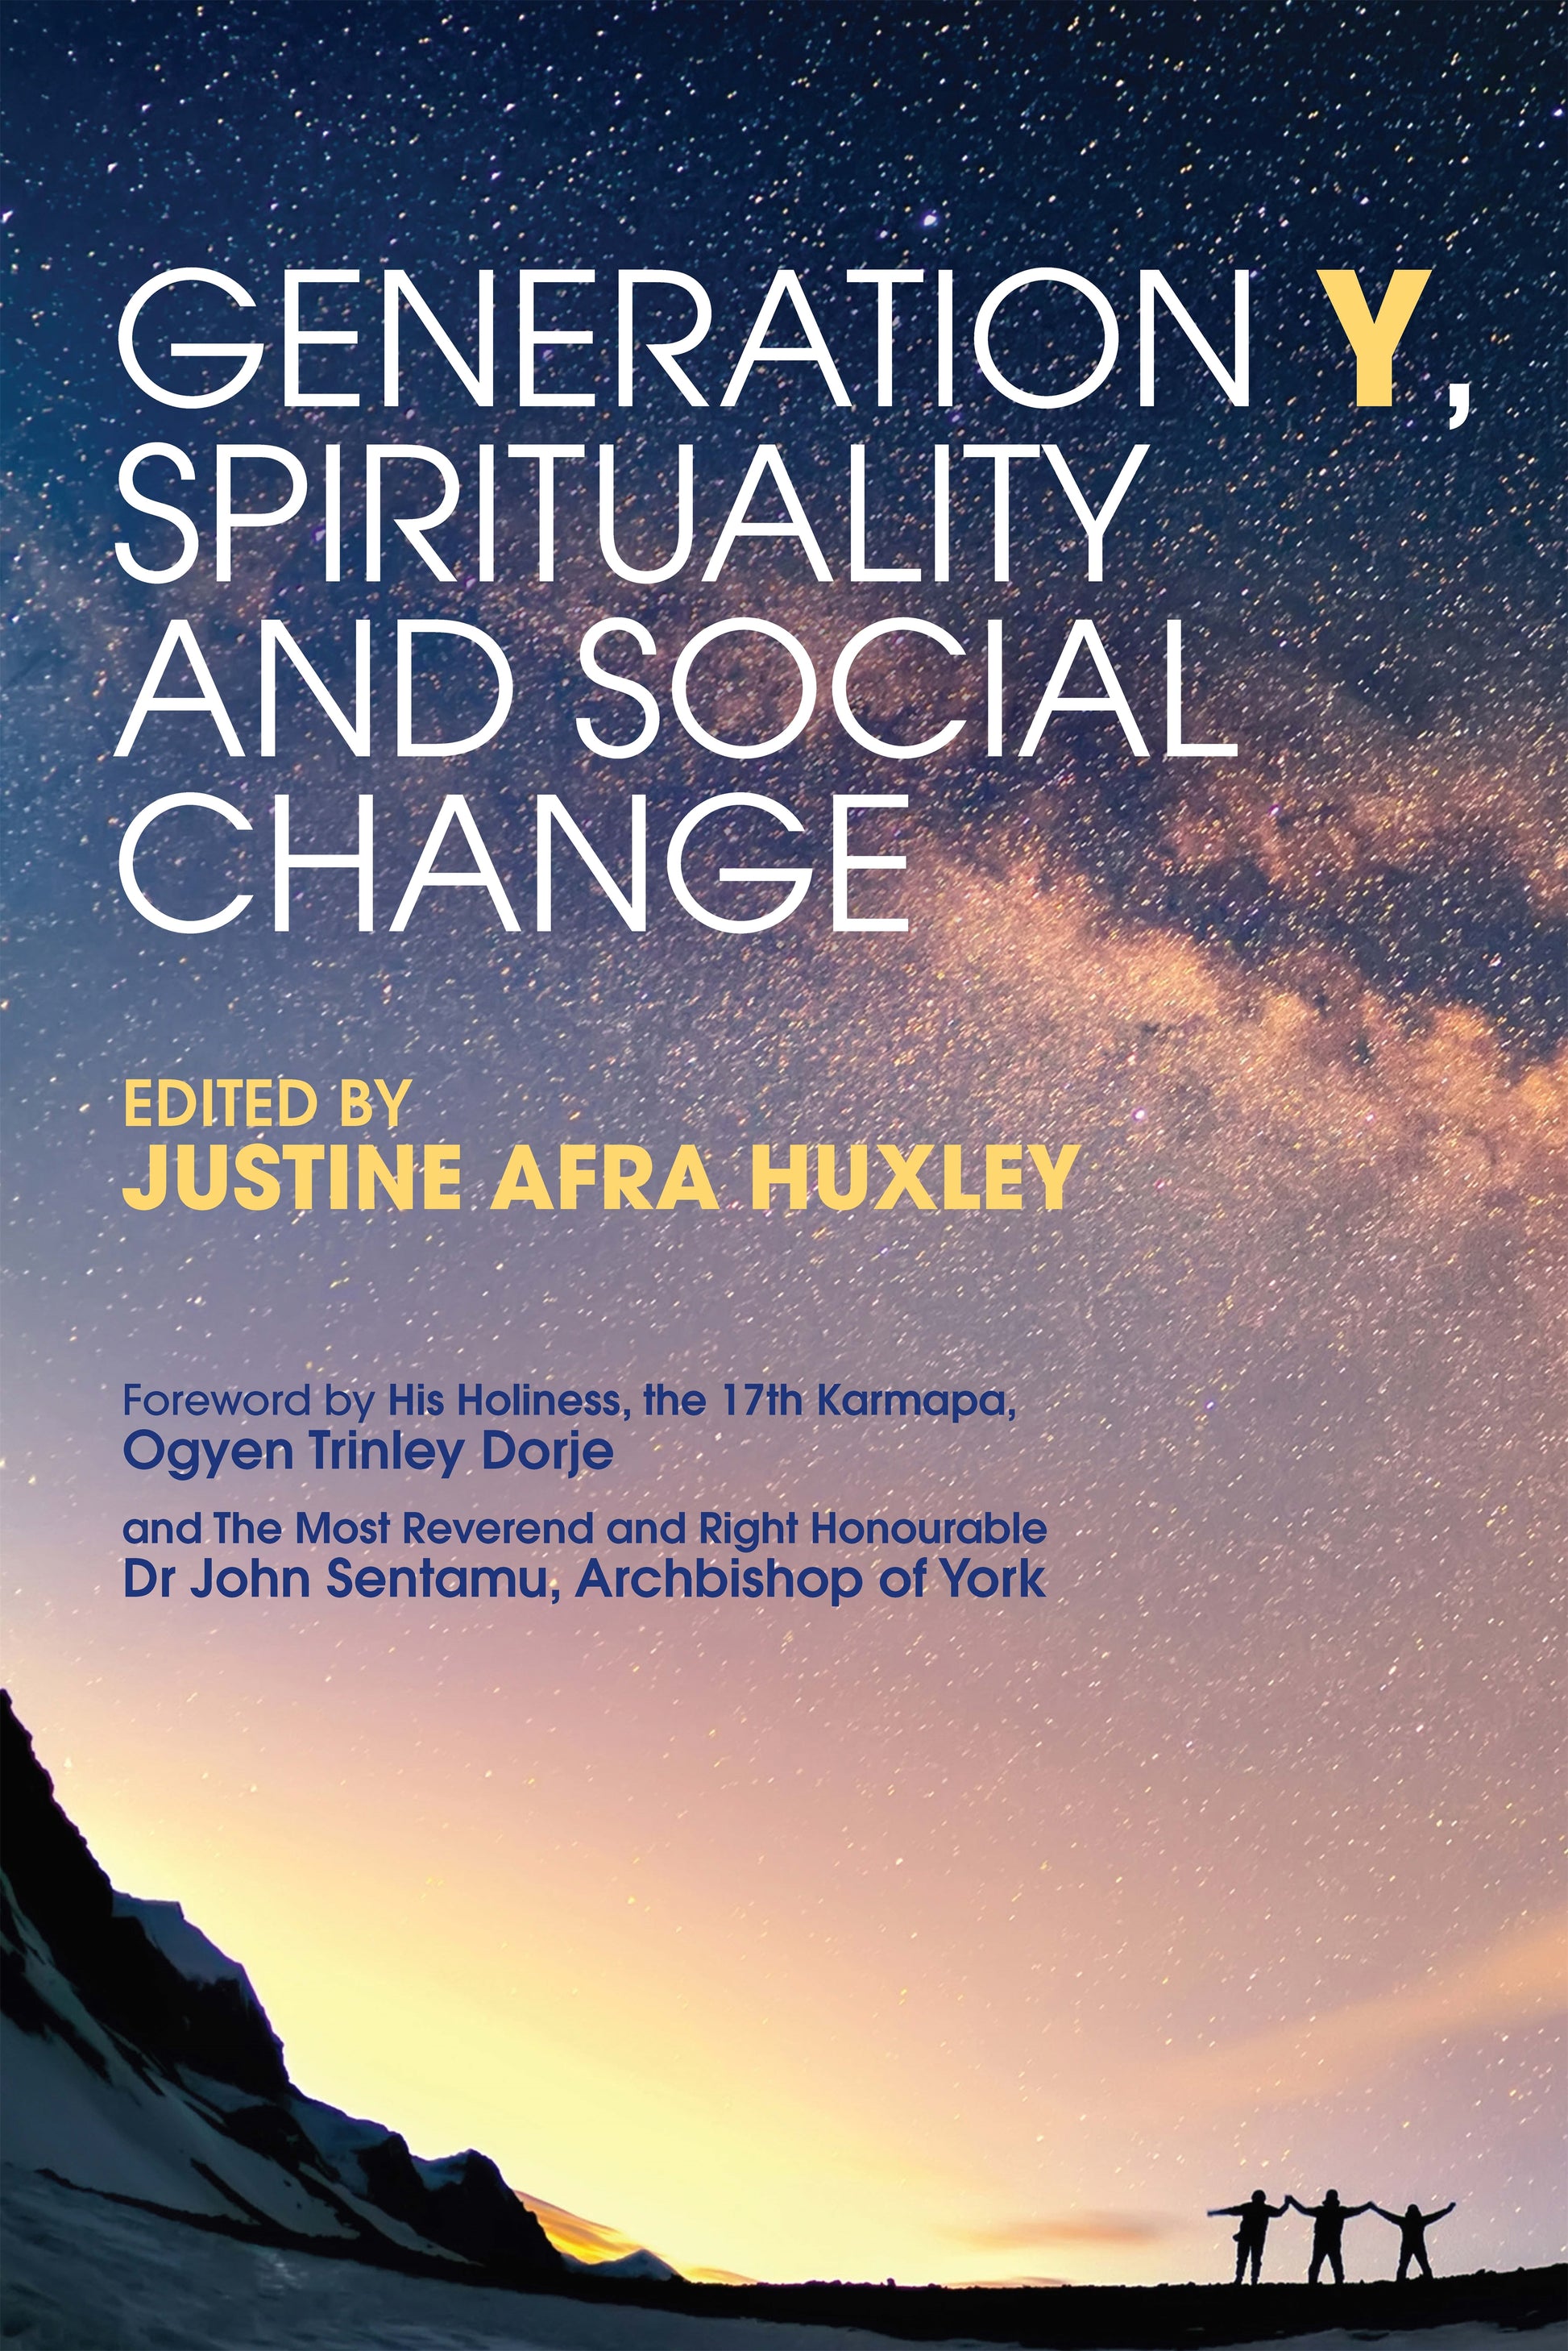 Generation Y, Spirituality and Social Change by No Author Listed, Justine Afra Huxley